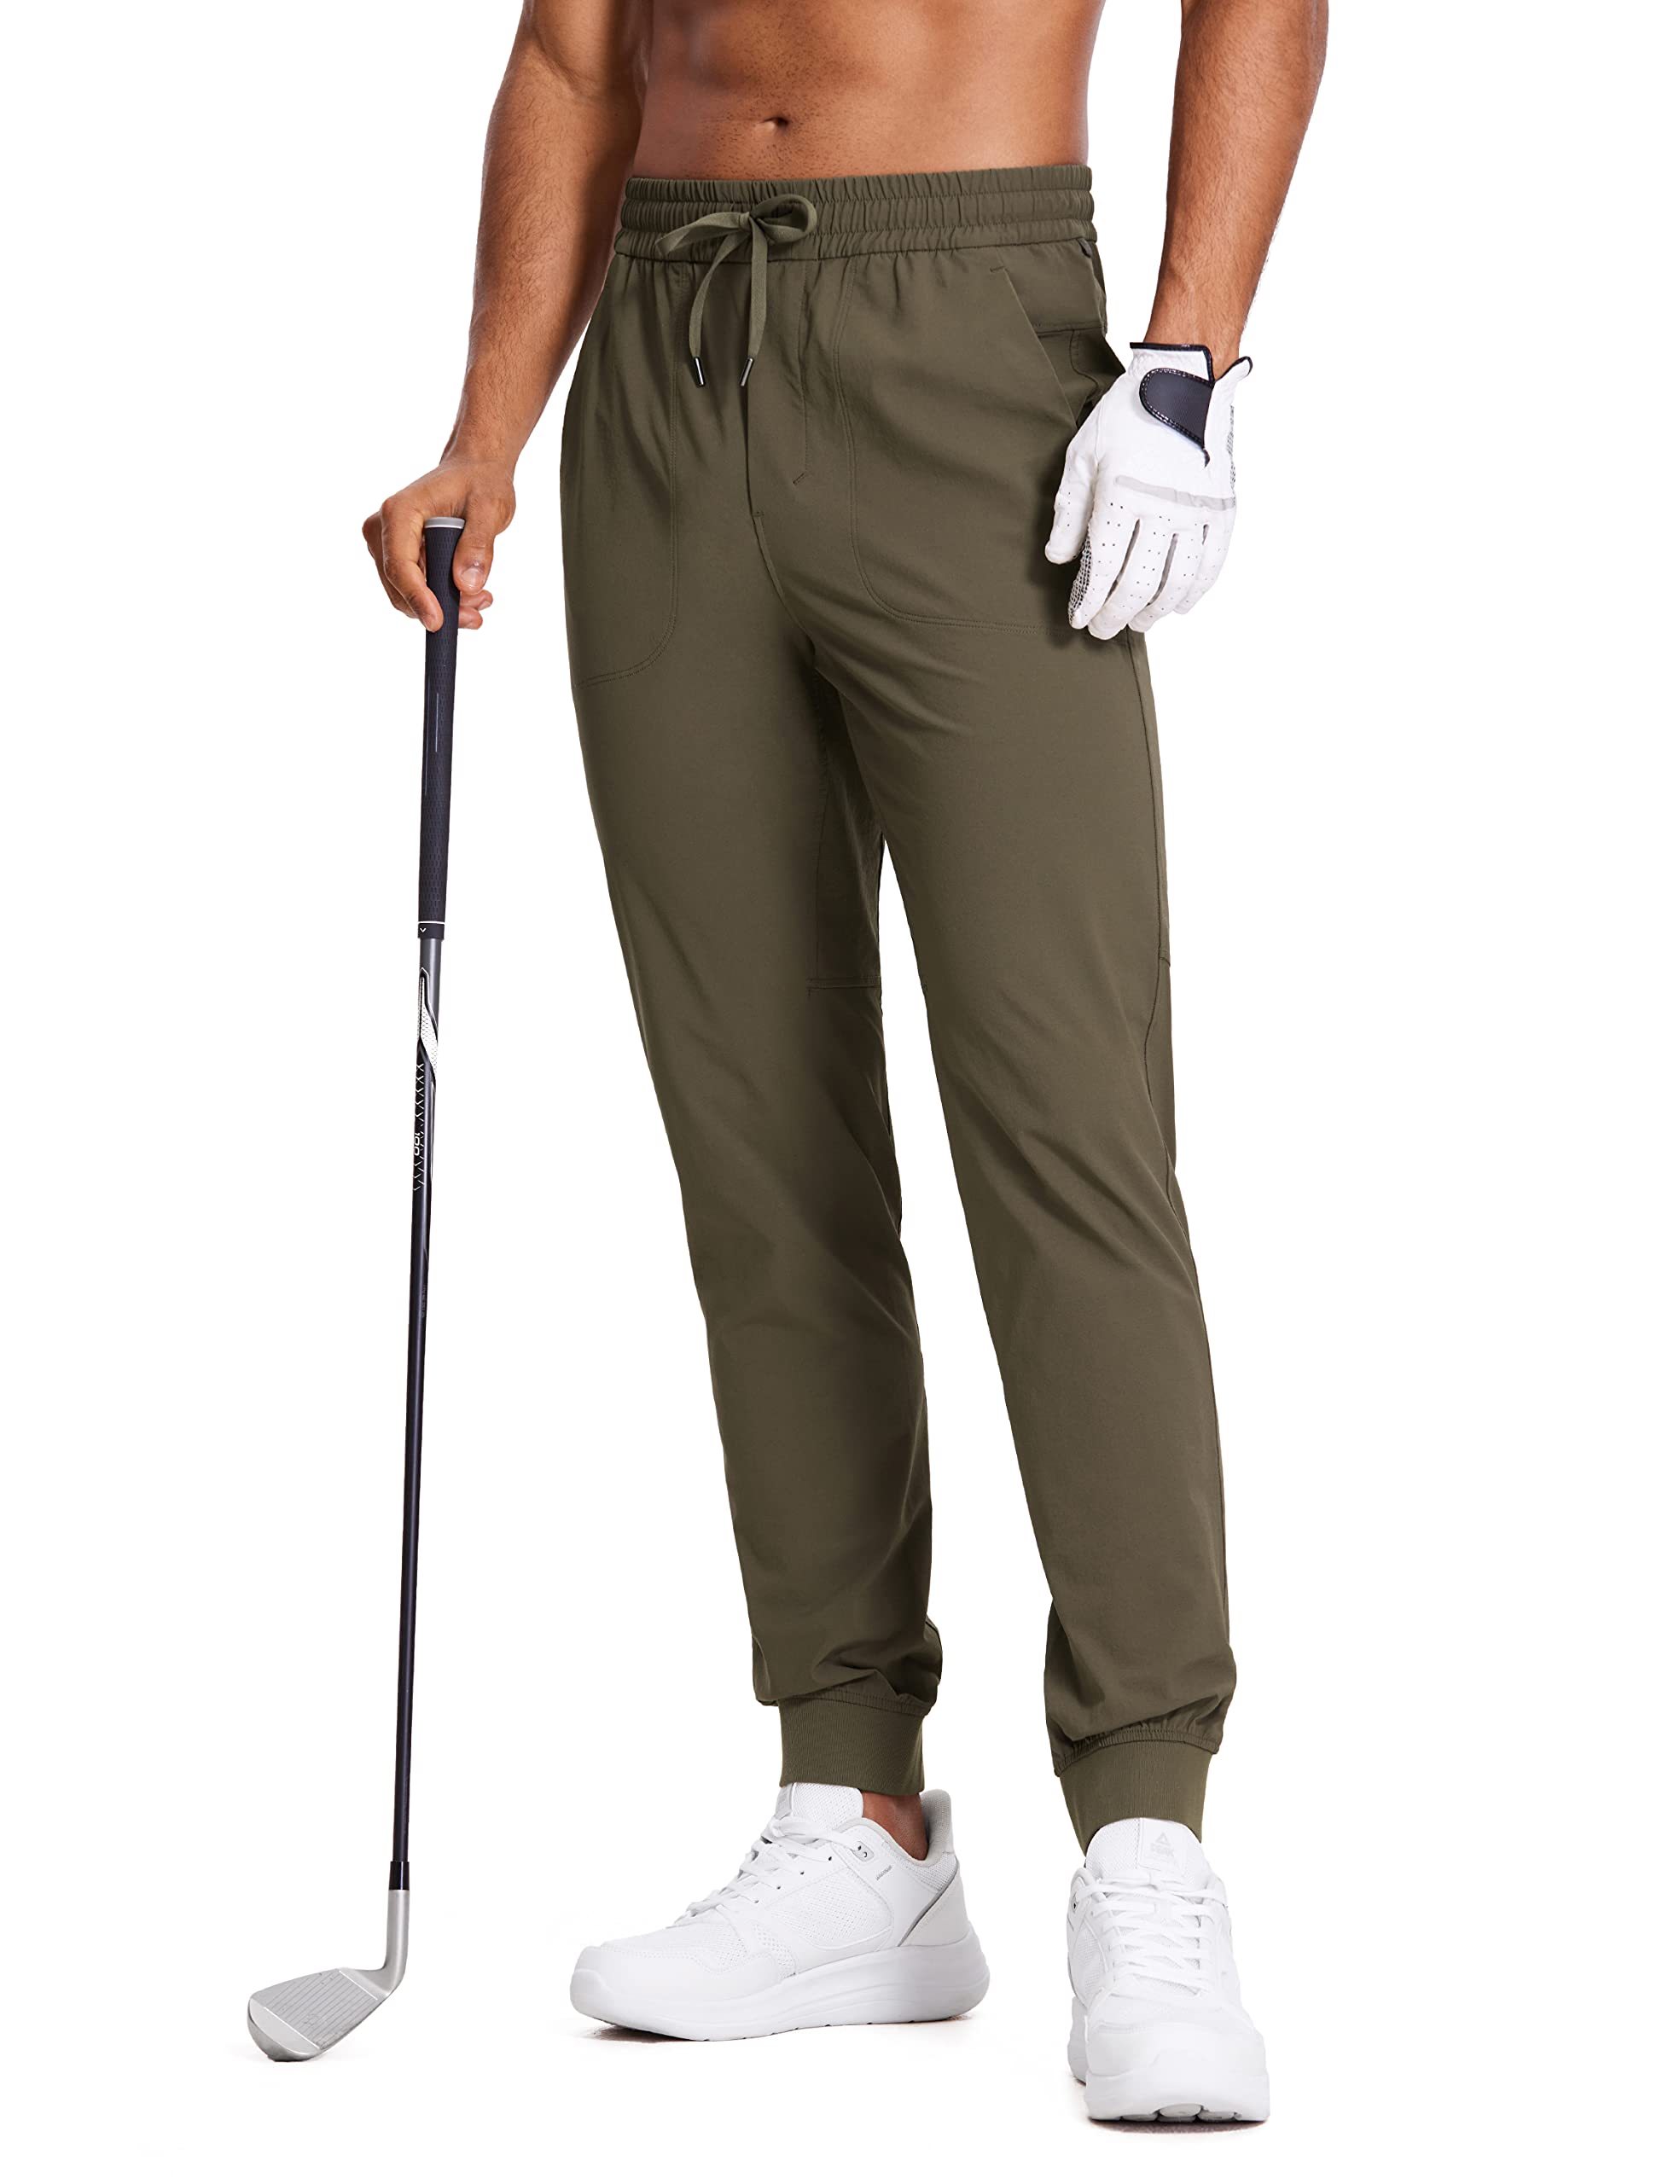 CRZ YOGA Men's Stretch Golf Joggers Pants - 30 Quick Dry Workout Track Pants  Joggers Casual Work Sweatpants with Pockets 30 inseam Large Olive Yellow